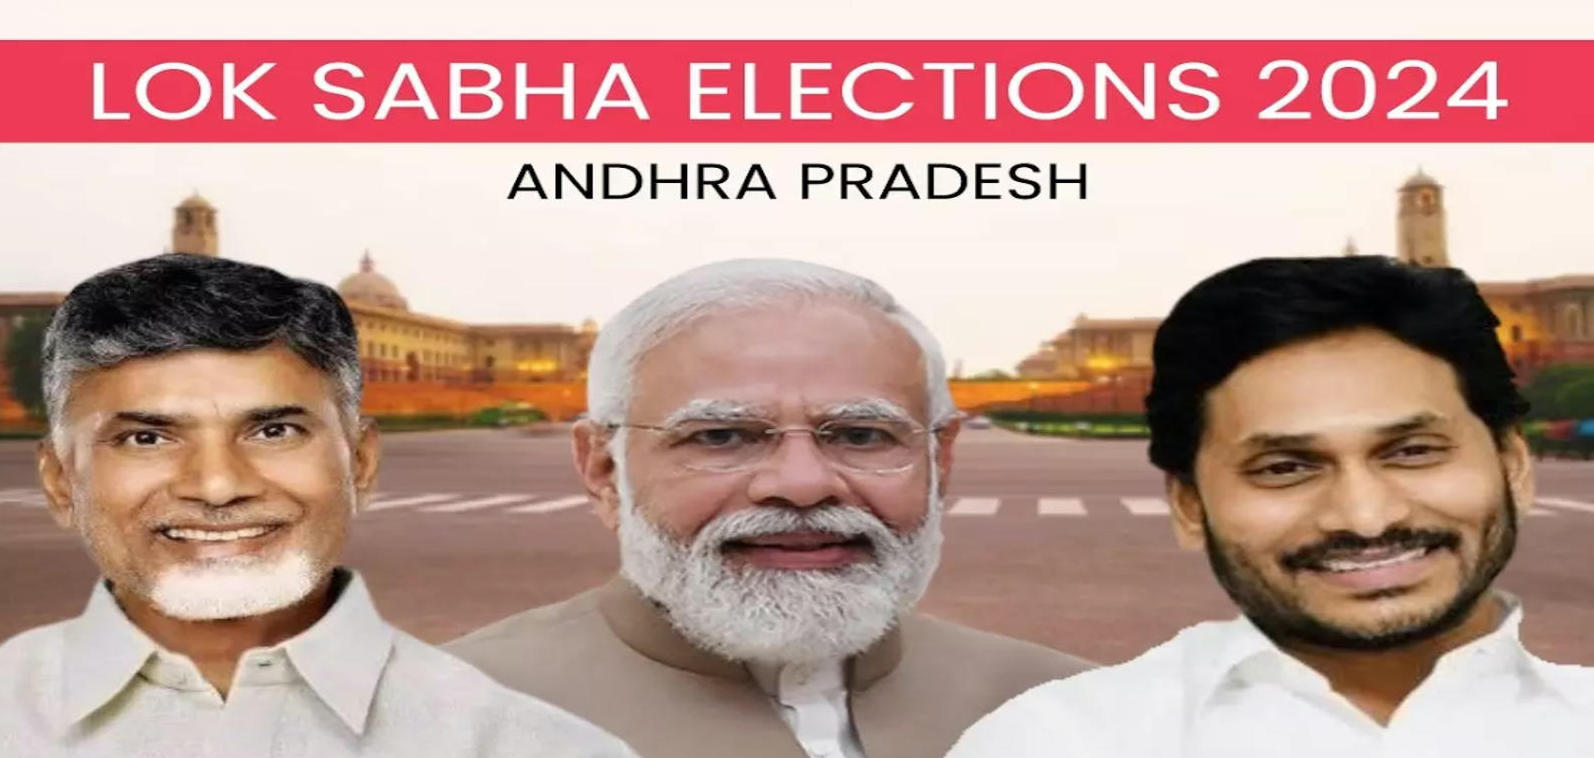 Andhra Pradesh Elections 2024 Phase 4 Live Updates: 23.10% voter turnout recorded till 11 am